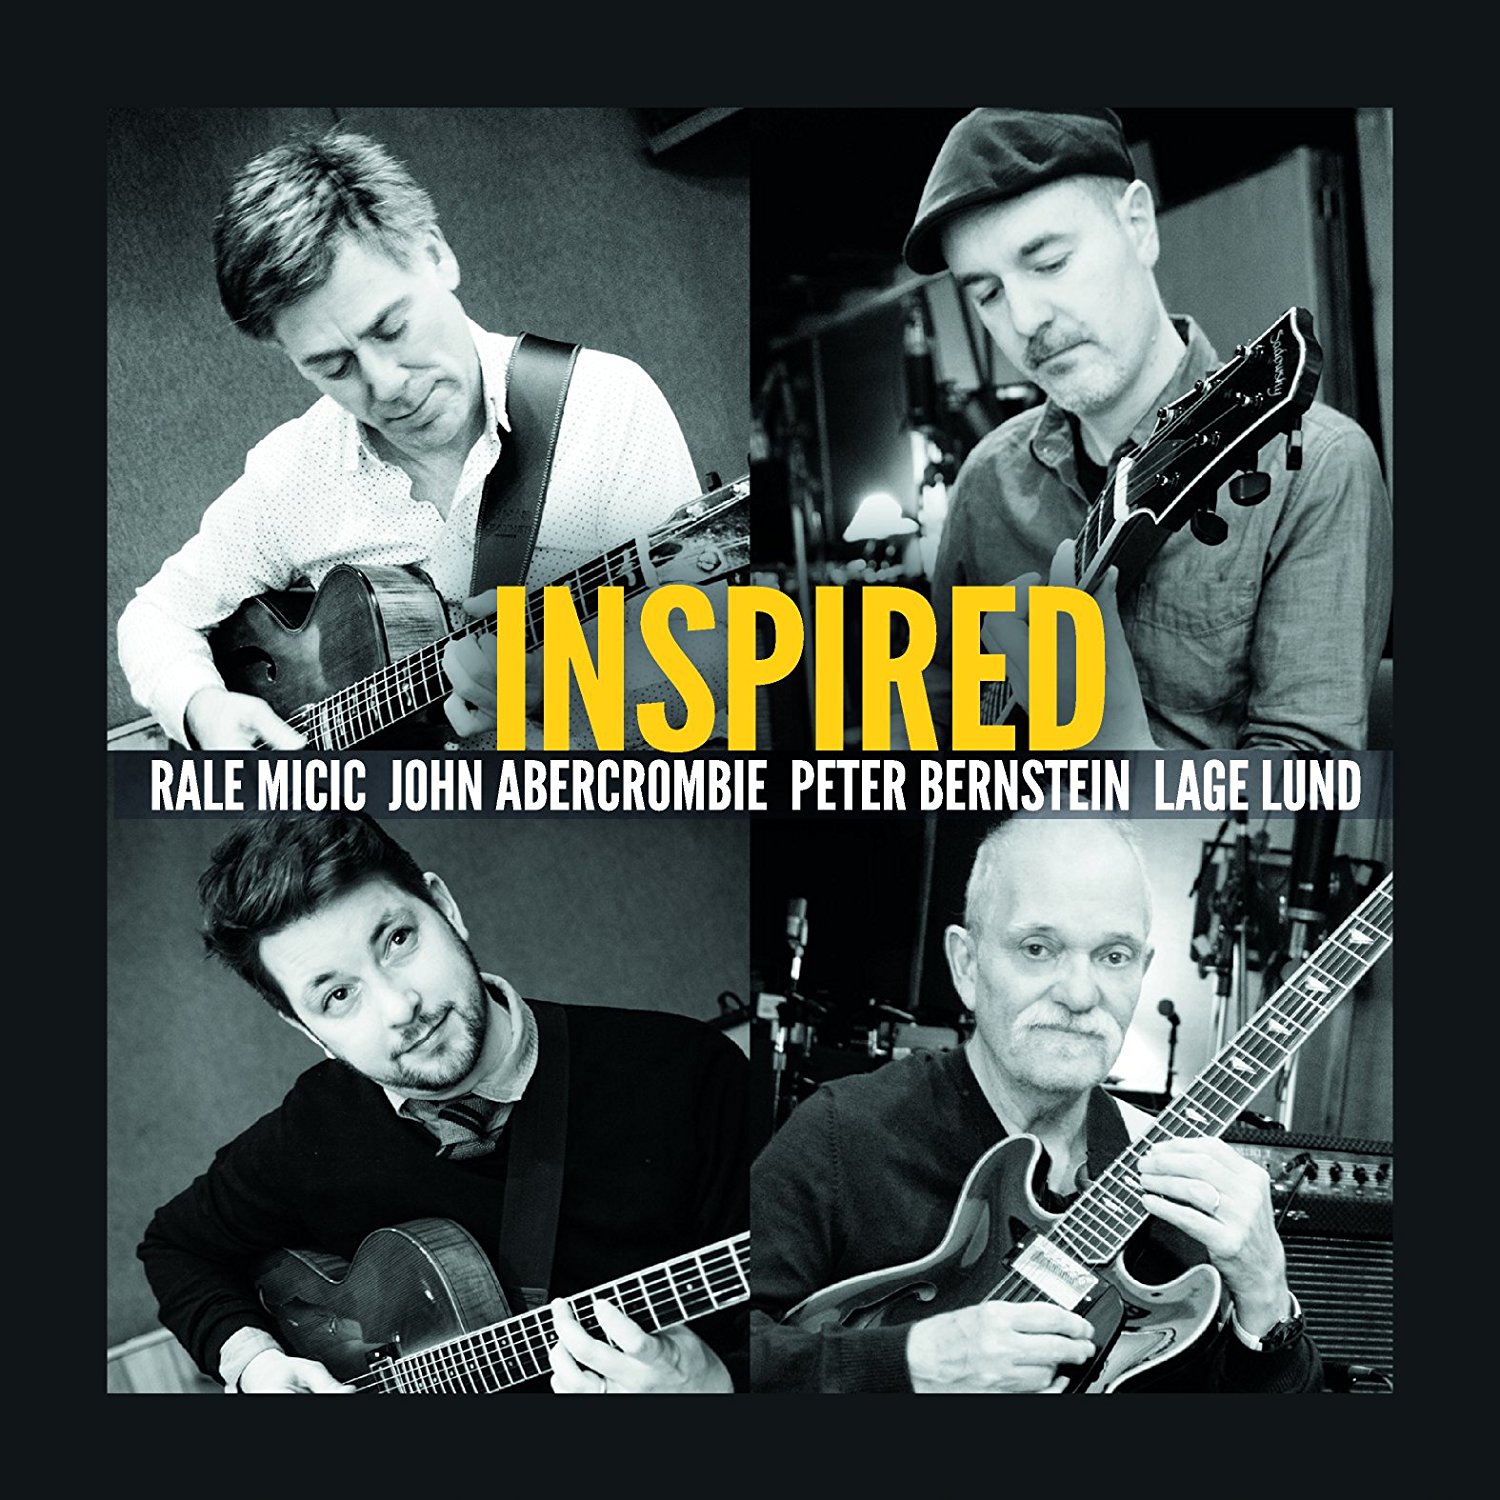 RALE MICIC - Rale Micic, John Abercrombie, Peter Bernstein, Lage Lund ‎: Inspired cover 